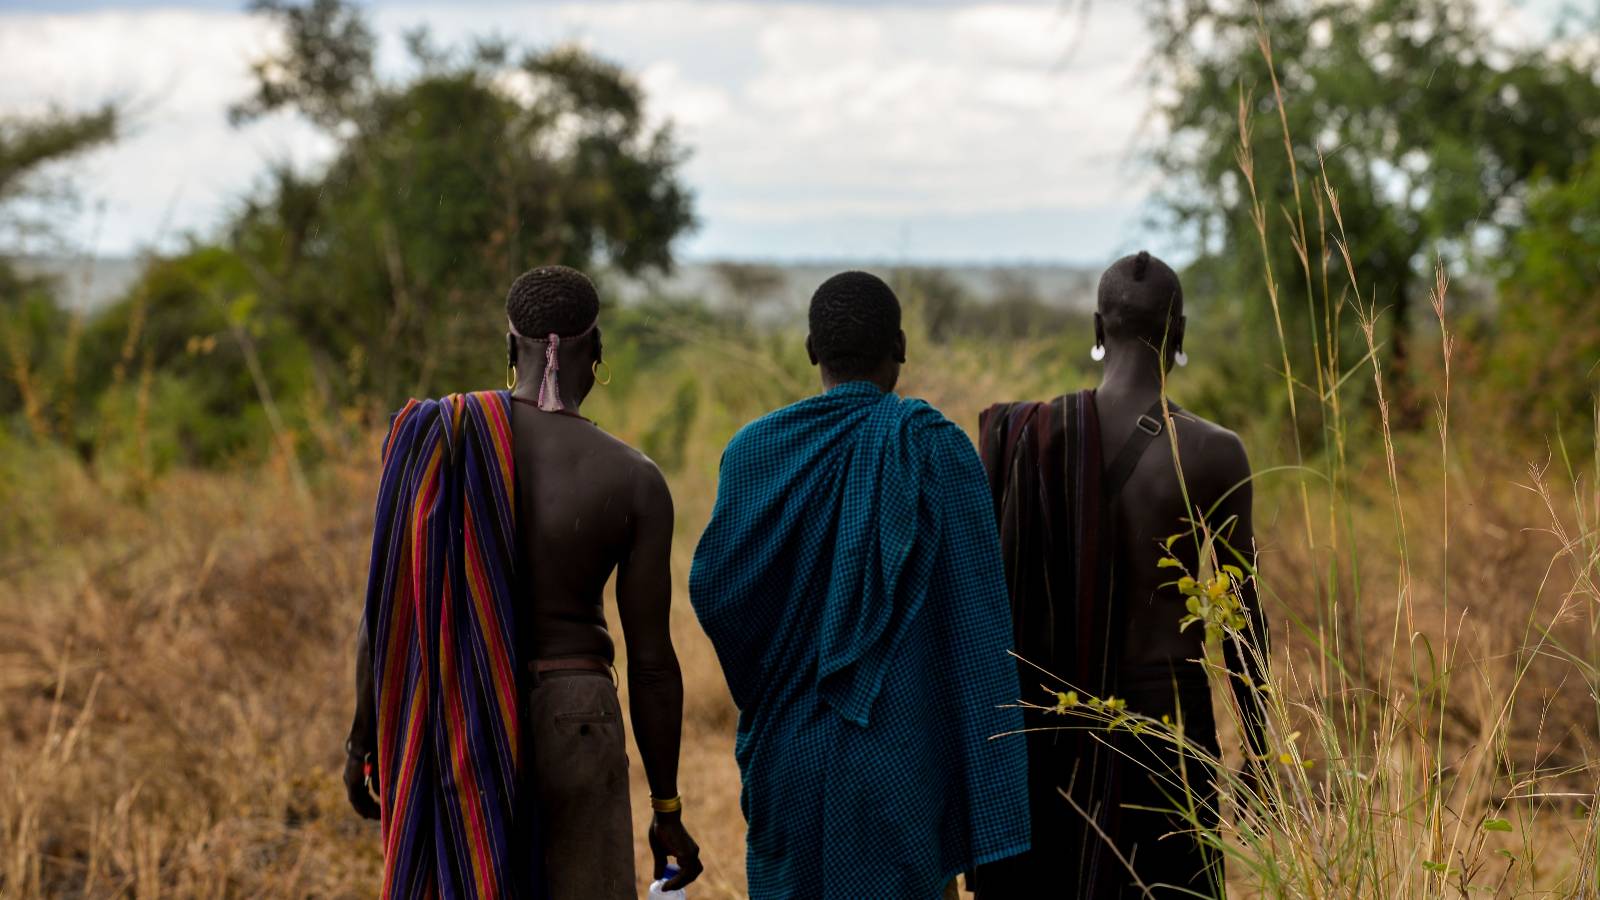 Three members of the Mursi tribe in Ethiopia look out at a forest in front of them, their backs to the camera.